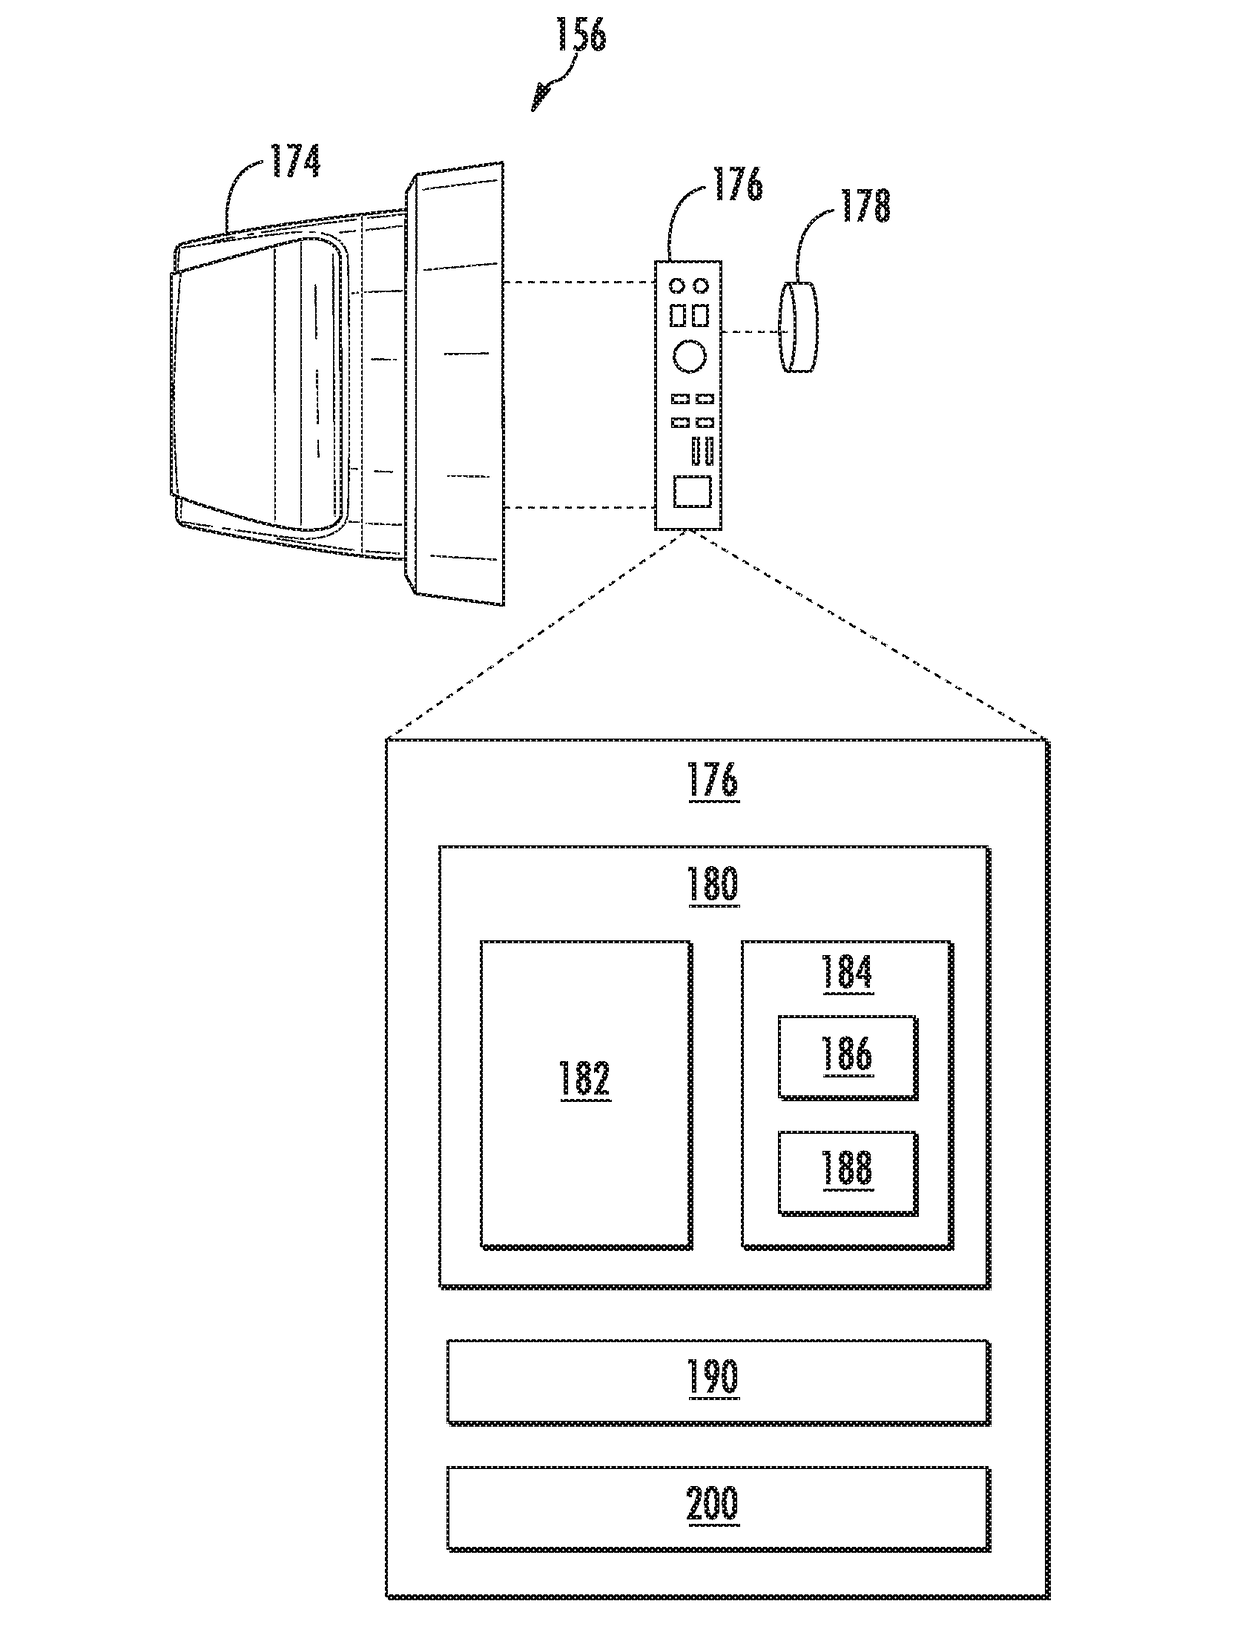 Assistive control attachment for an appliance